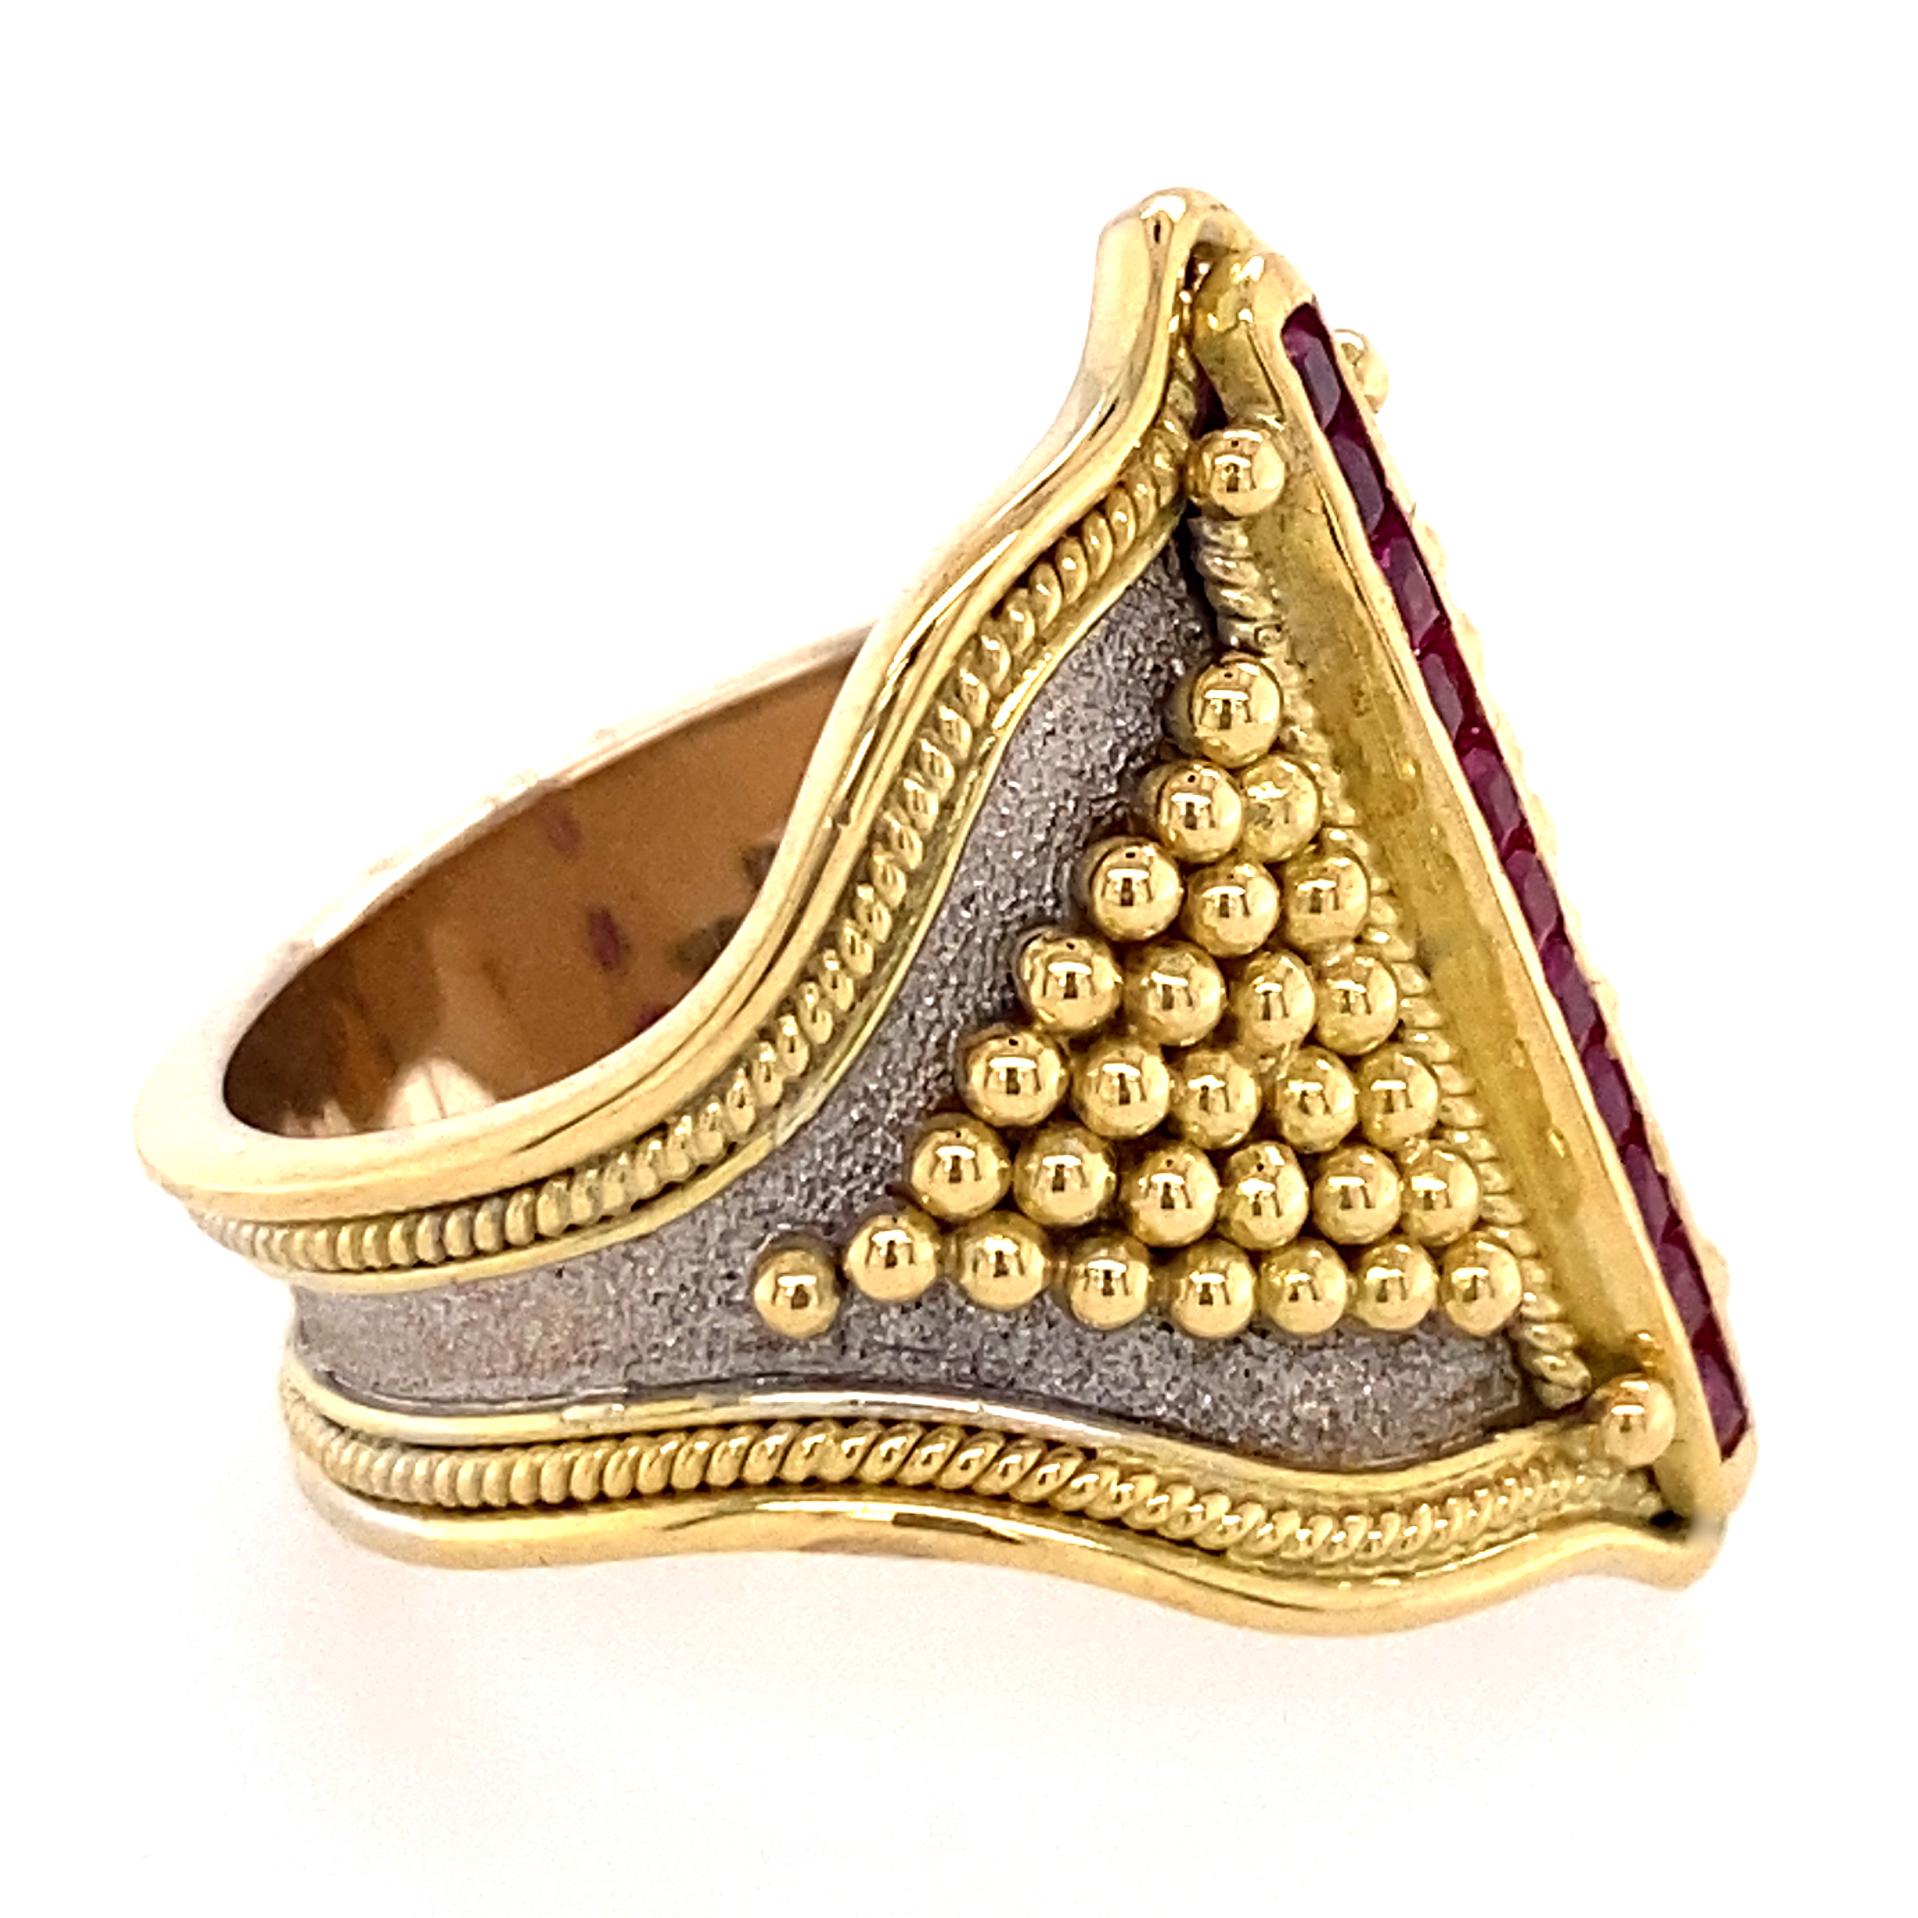 Cigar Band or Shield Ring in 18K Gold with Carré-Cut Rubies & Granulation Detail 1